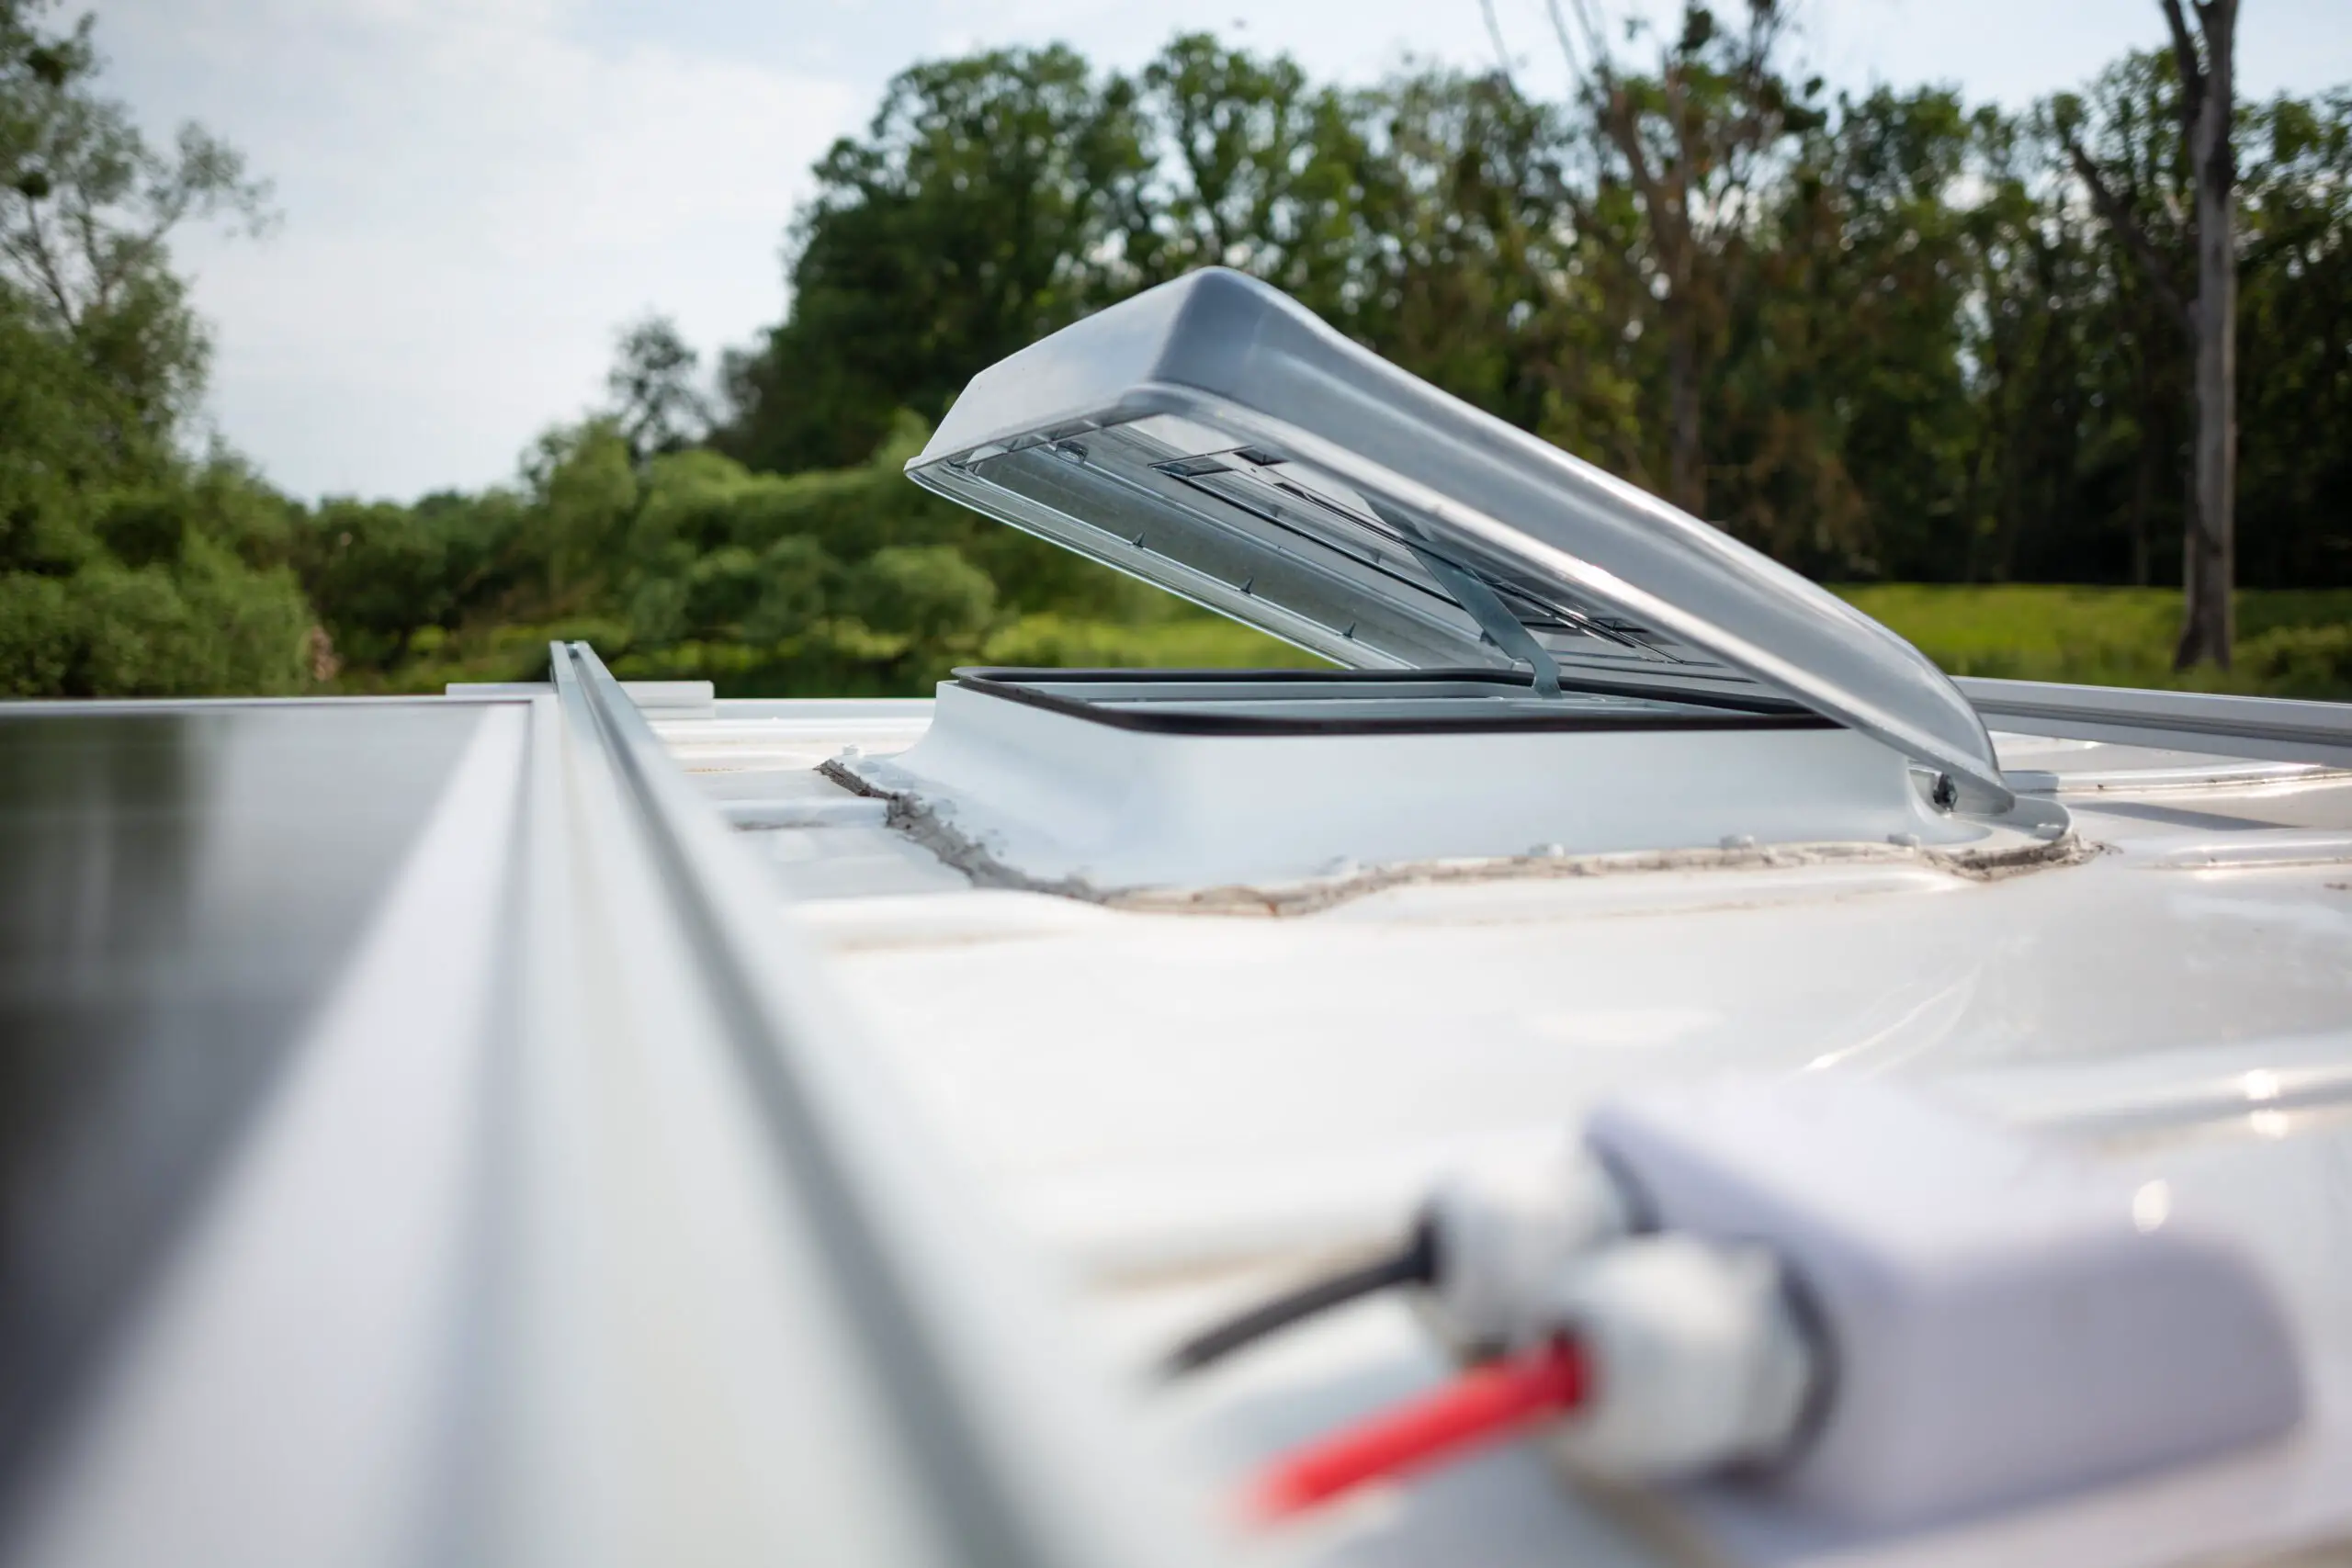 Should You Use RV Rubber Roof Coating?